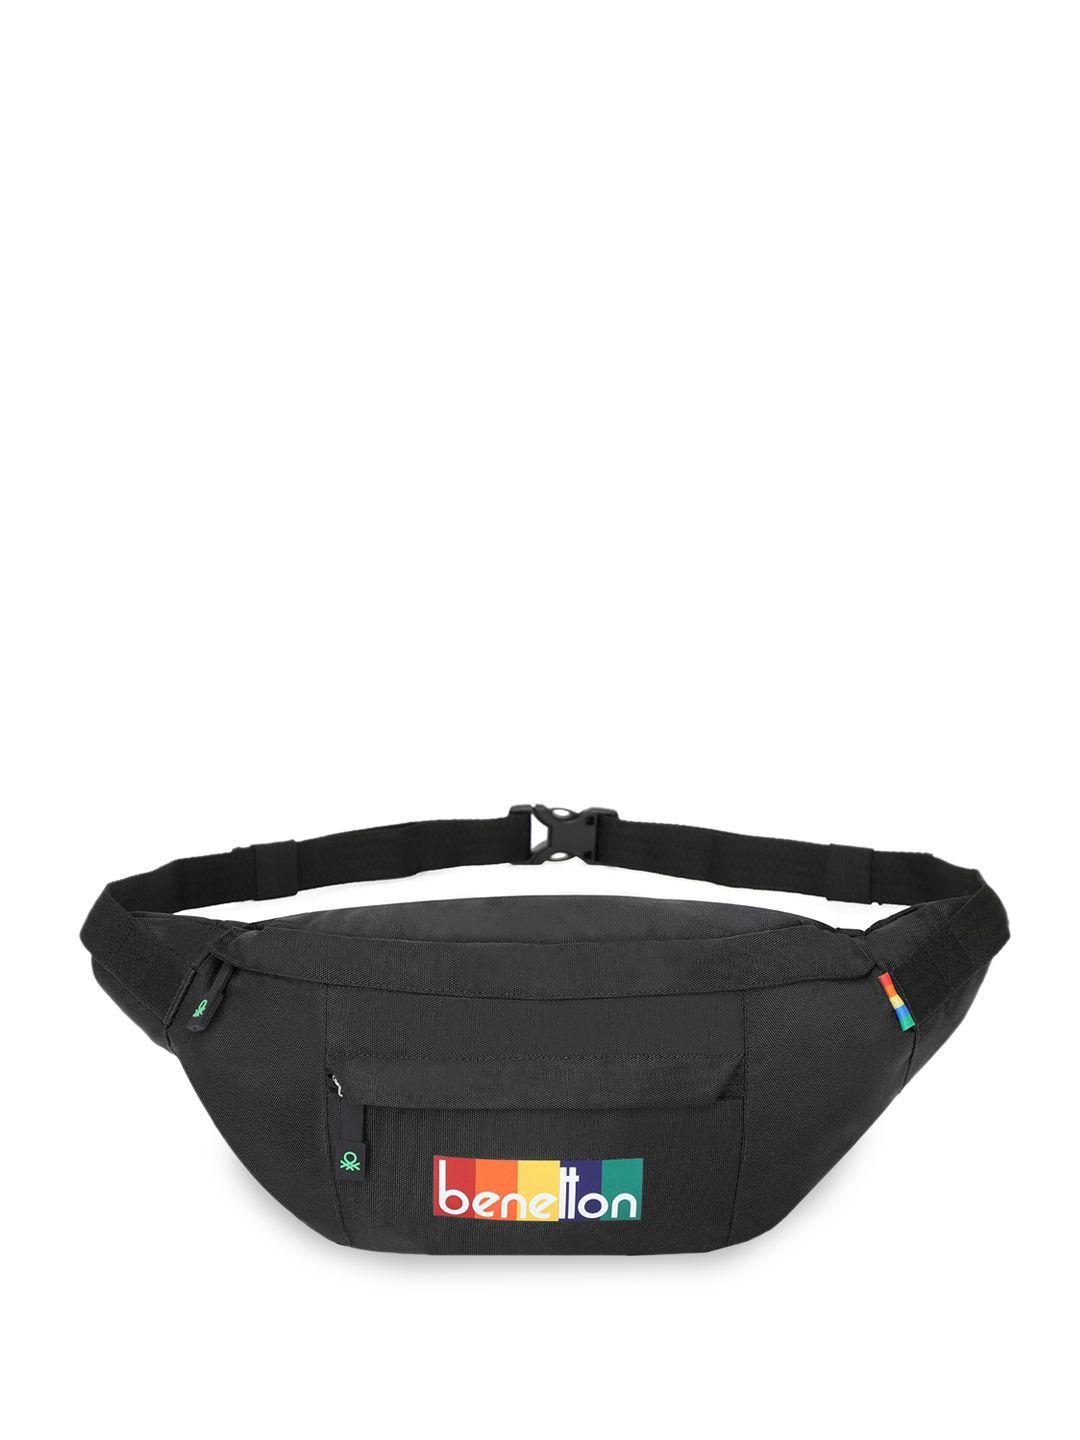 united colors of benetton unisex printed waist pouch